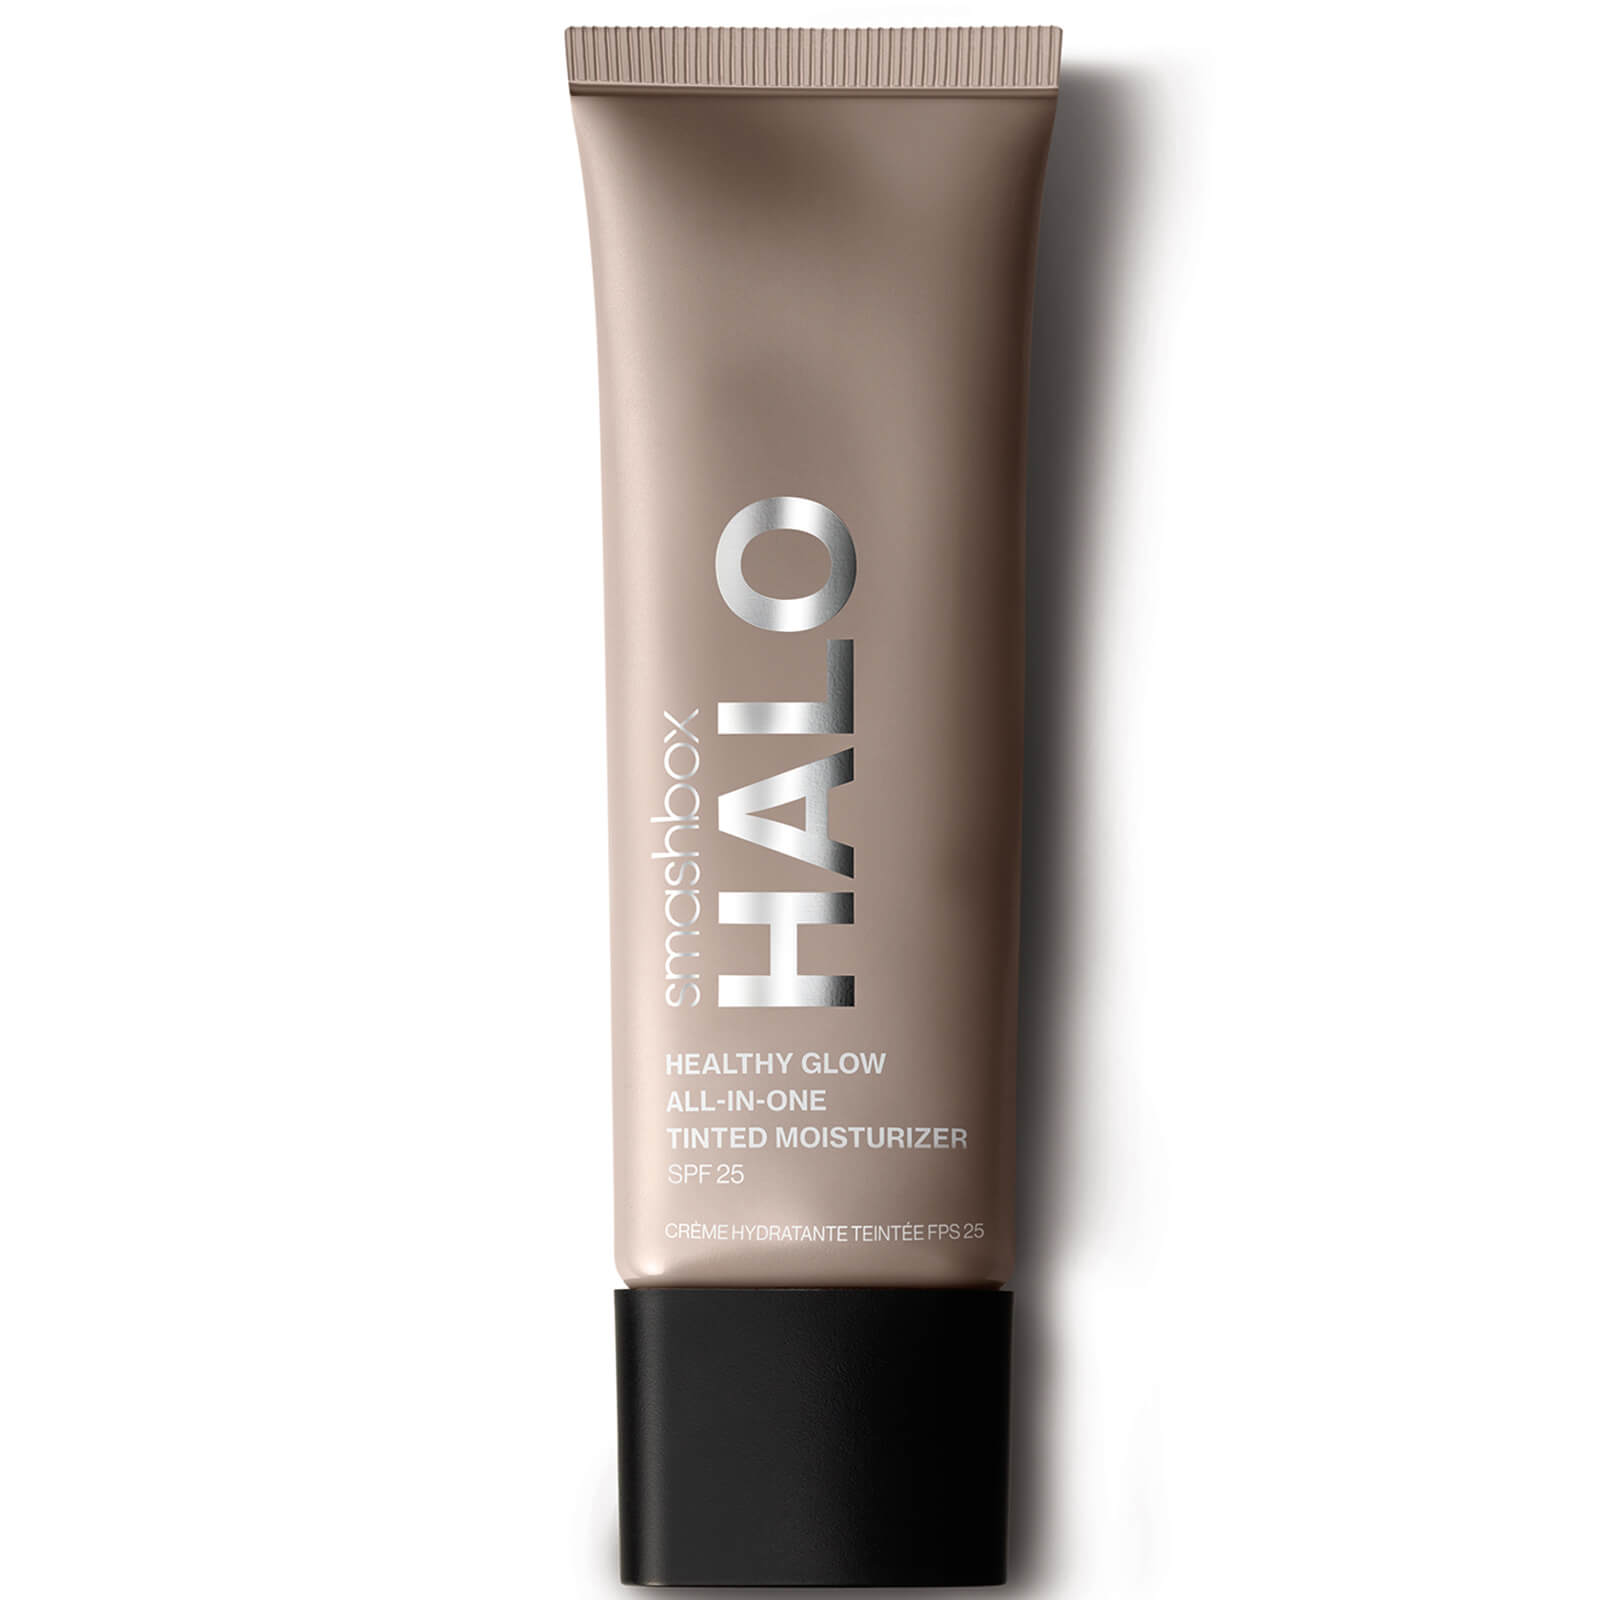 Smashbox Halo Healthy Glow All-in-One SPF25 Tinted Moisturiser 40ml (Various Shades) - Tan Olive